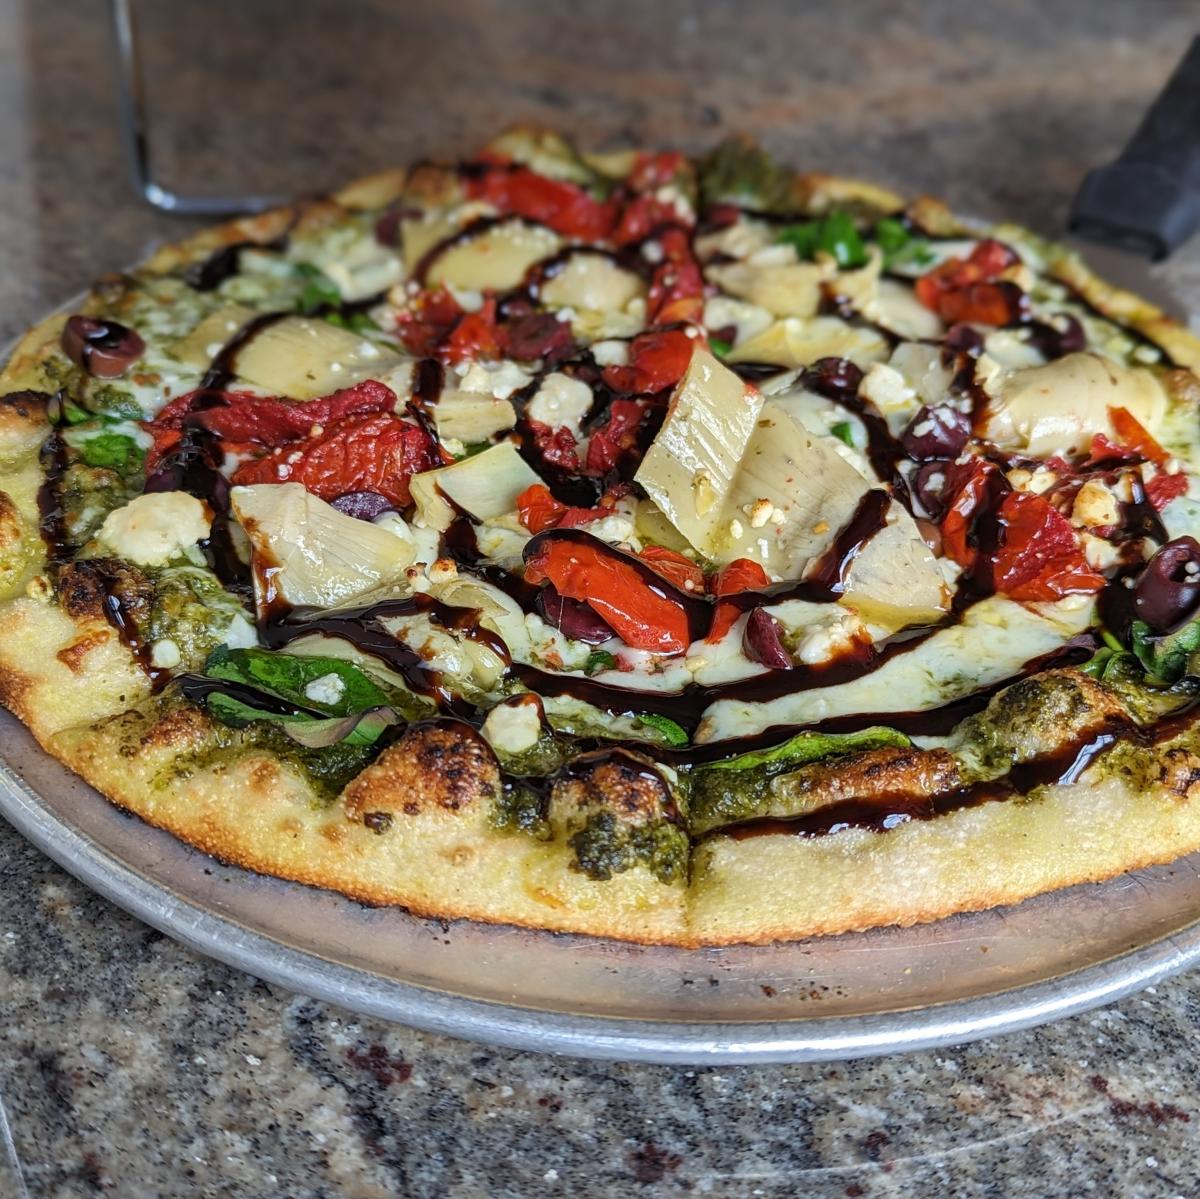 The image is of a Mediterranean pizza featuring a pesto sauce, blend of Italian cheeses, tomatoes and a balsamic glaze.